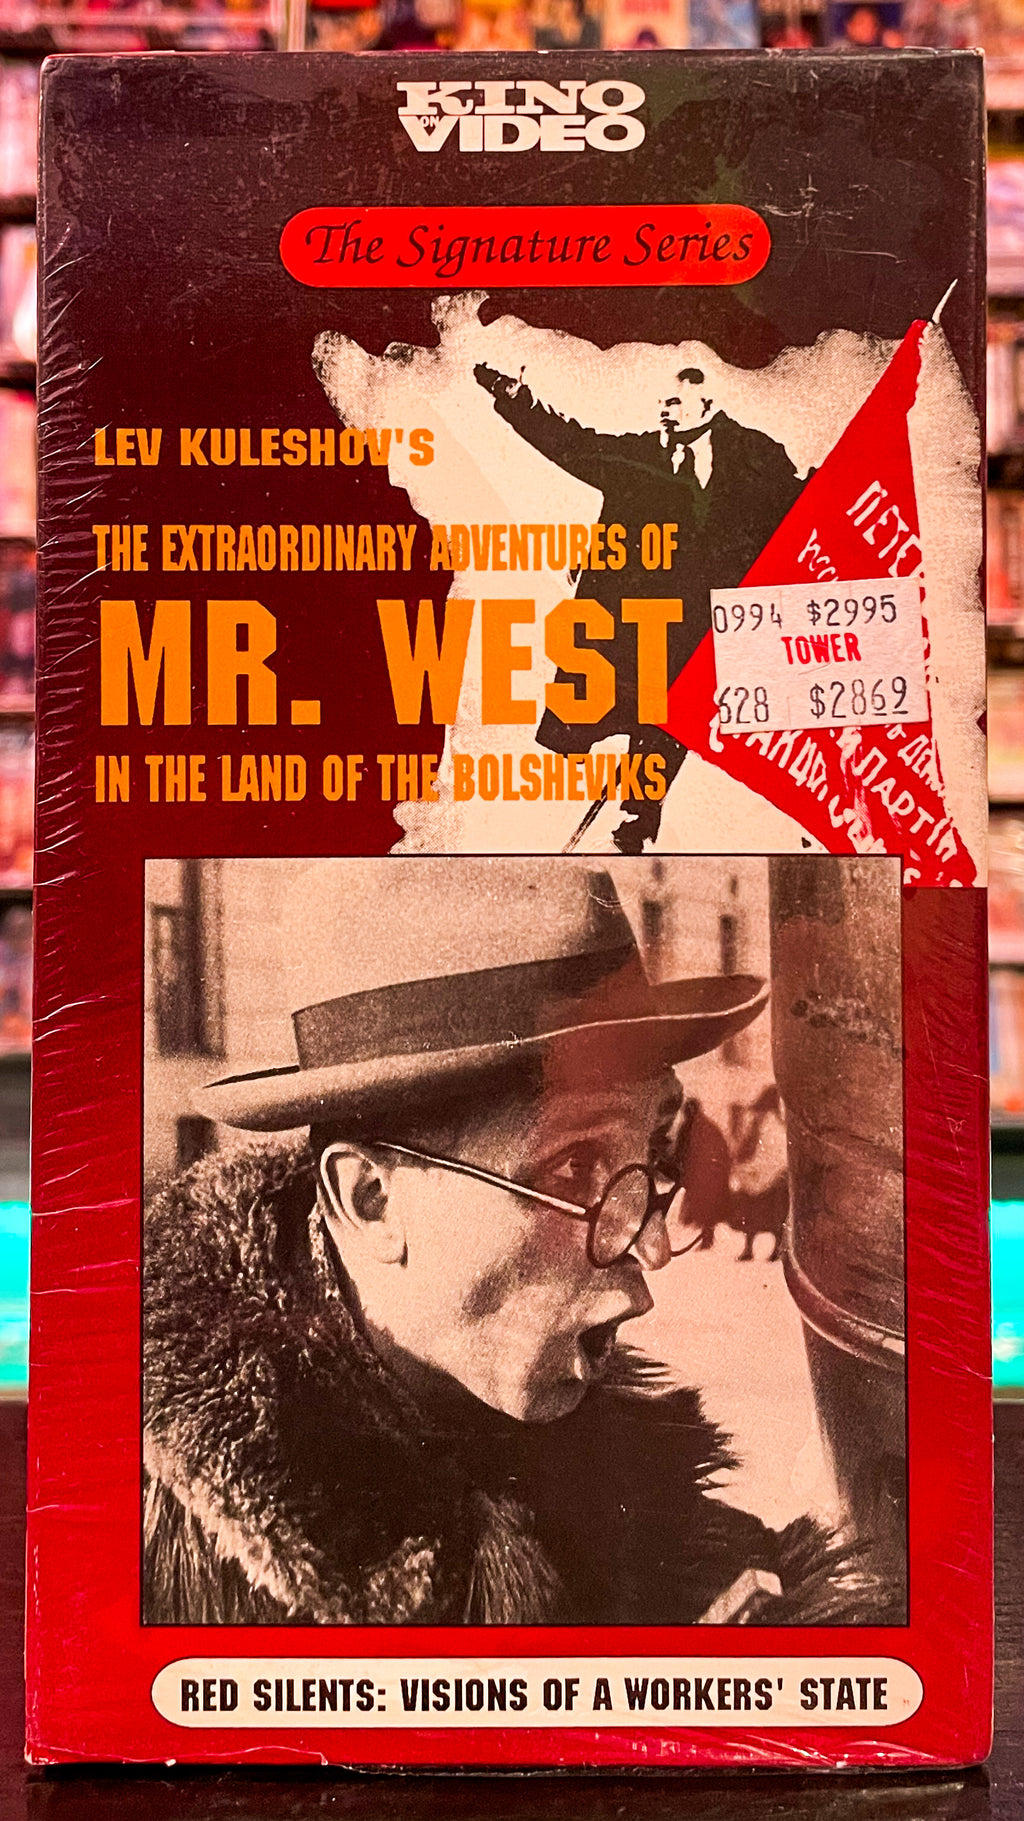 The Extraordinary Adventures of Mr. West in The Land of The Bolsheviks